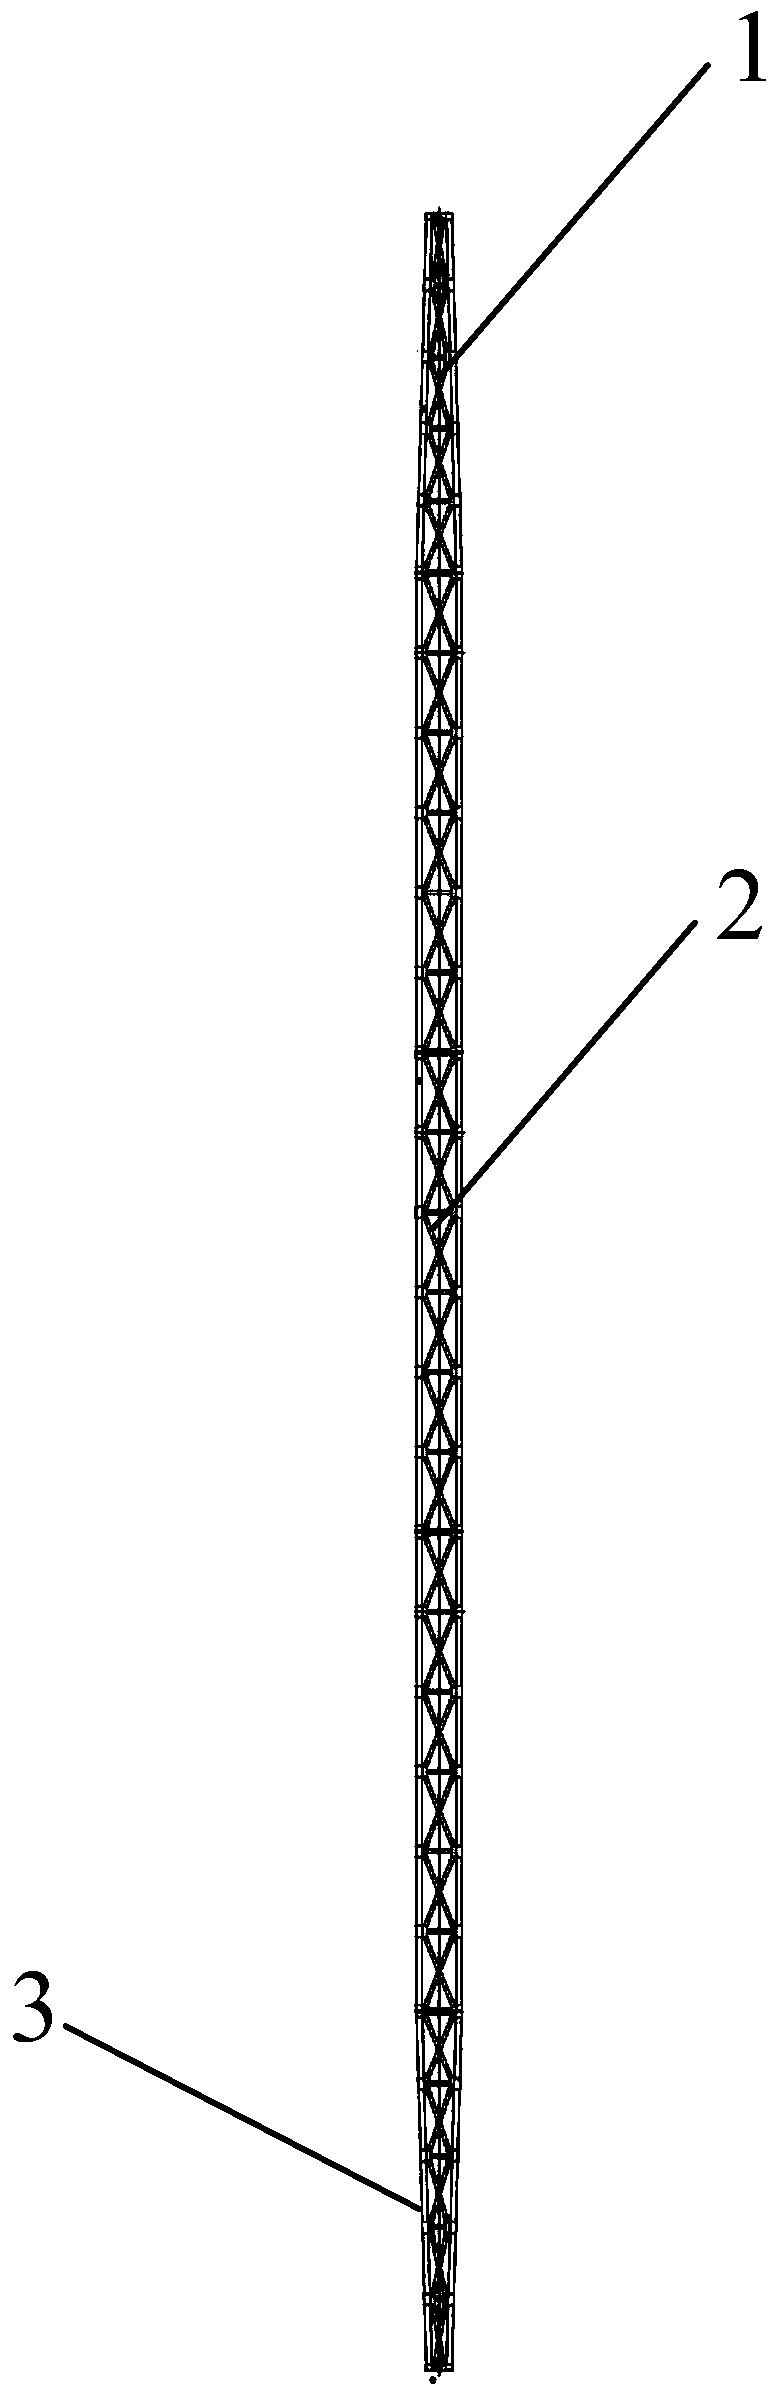 A pole for assembling transmission towers